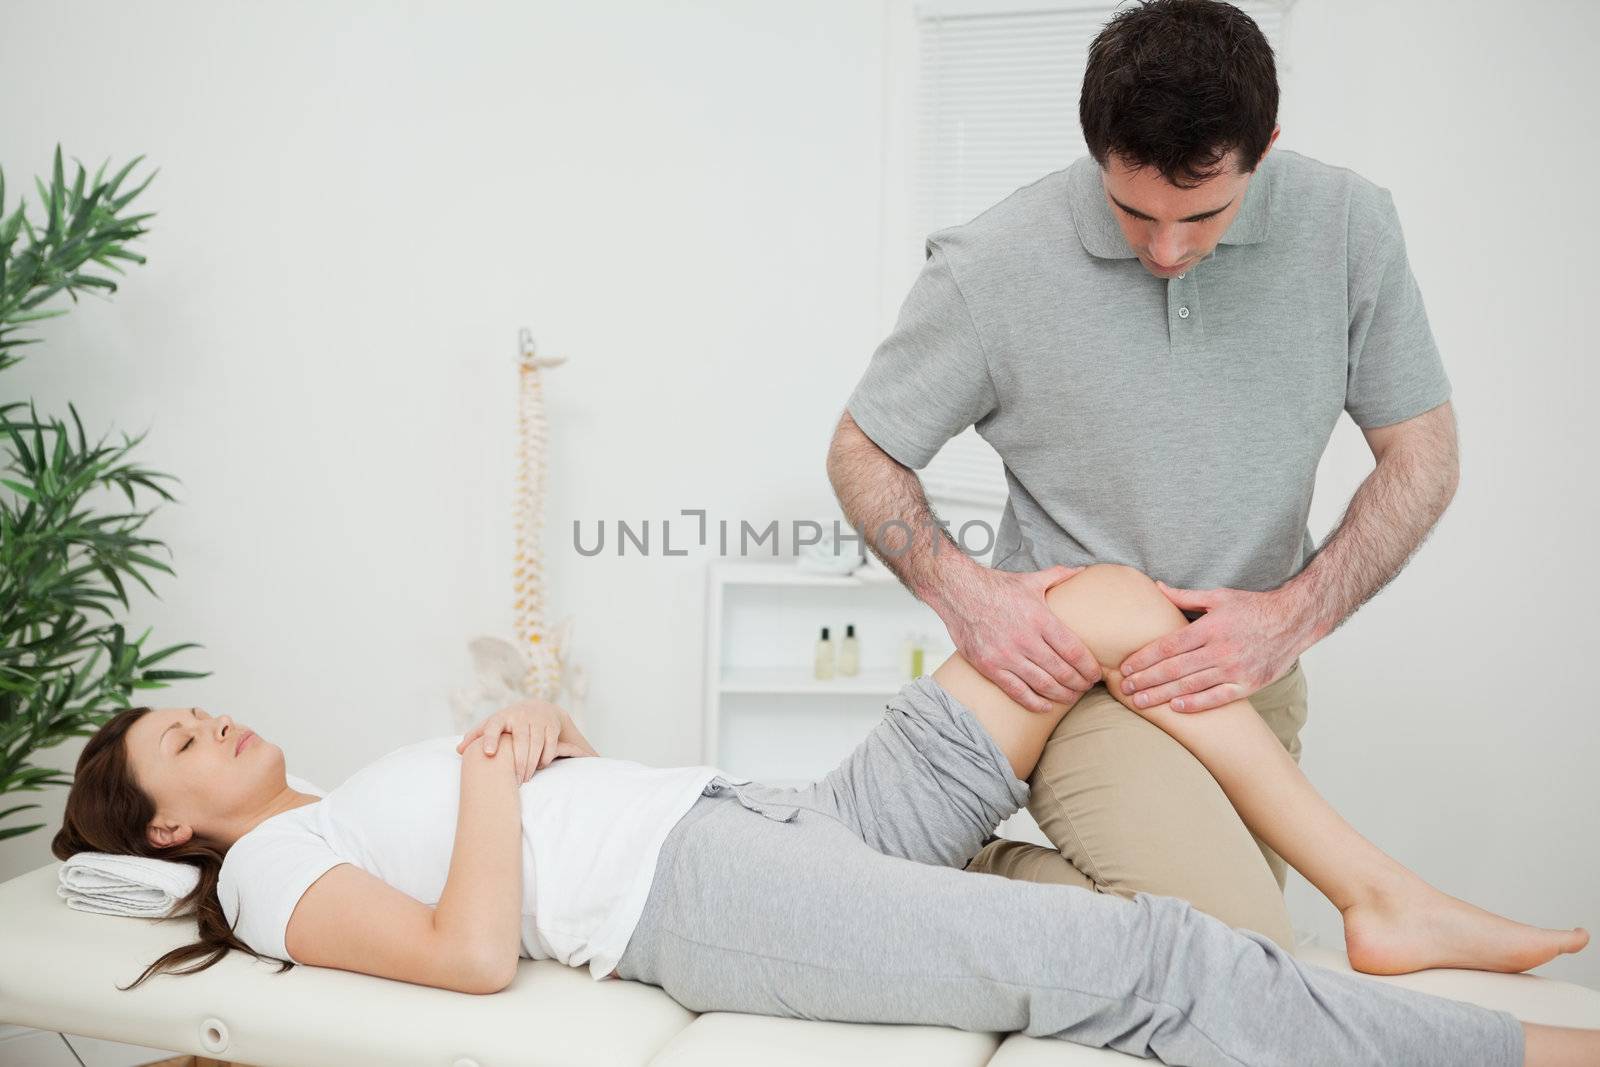 Black-haired osteopath touching the knee of a patient by Wavebreakmedia